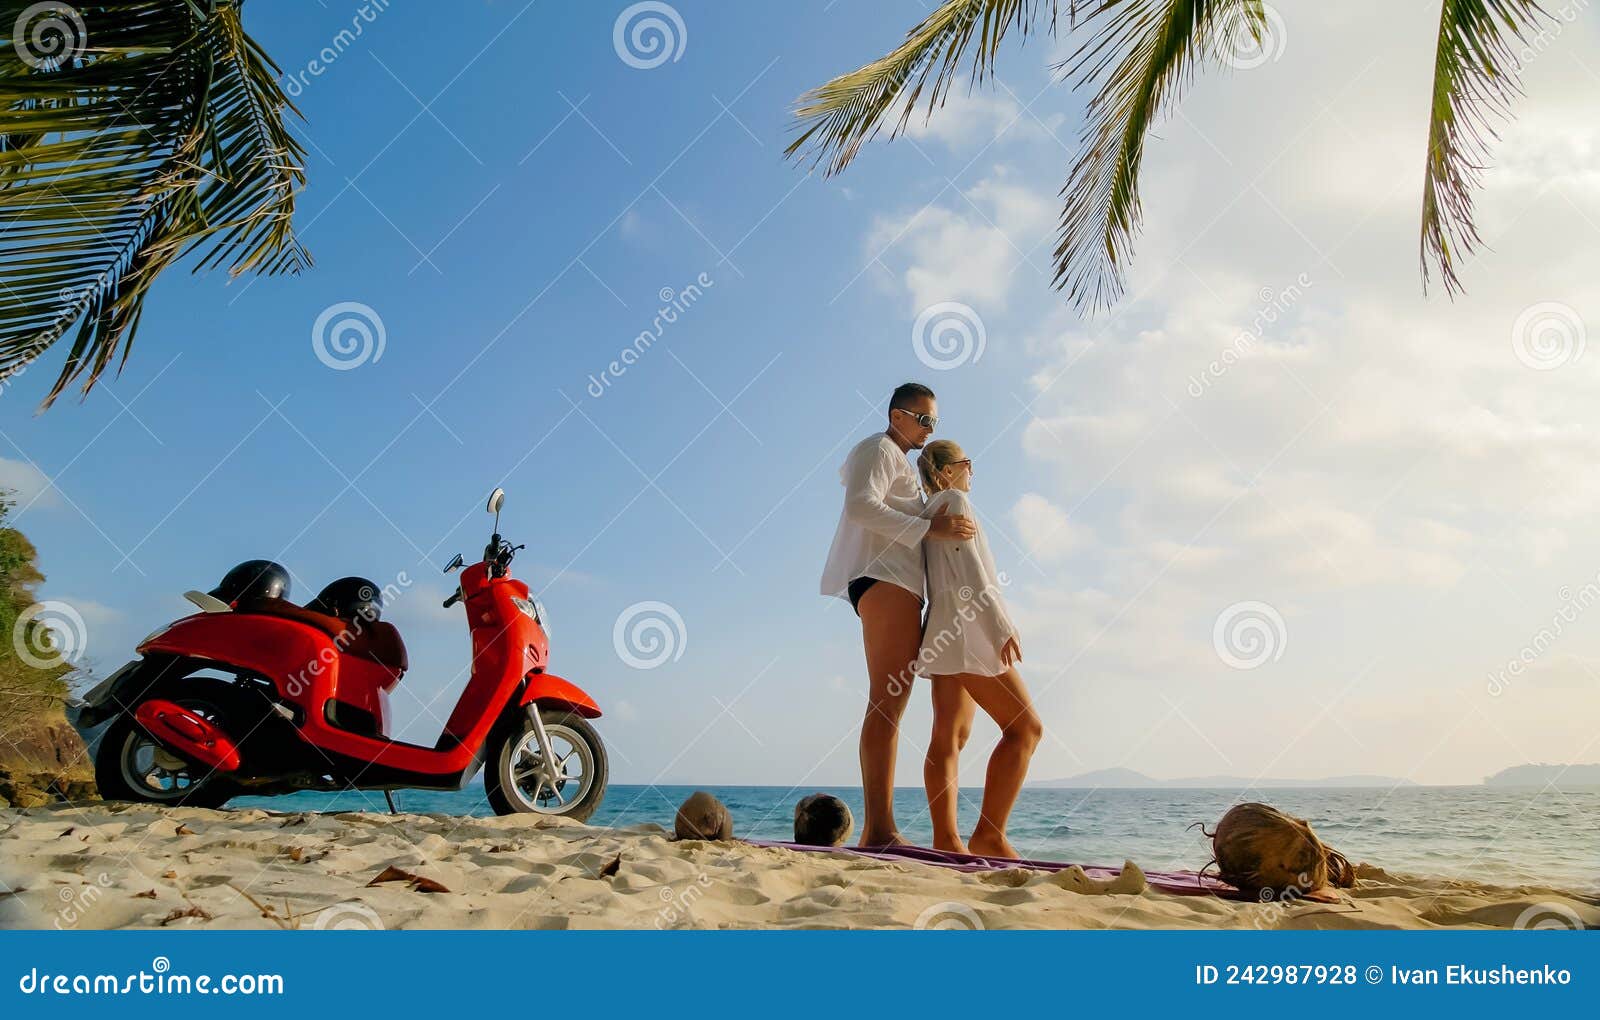 Scooter Road Trip. Lovely Couple on Red Motorbike in White Clothes on Sand  Beach. People Walking Near the Tropical Palm Stock Photo - Image of hand,  road: 242987928